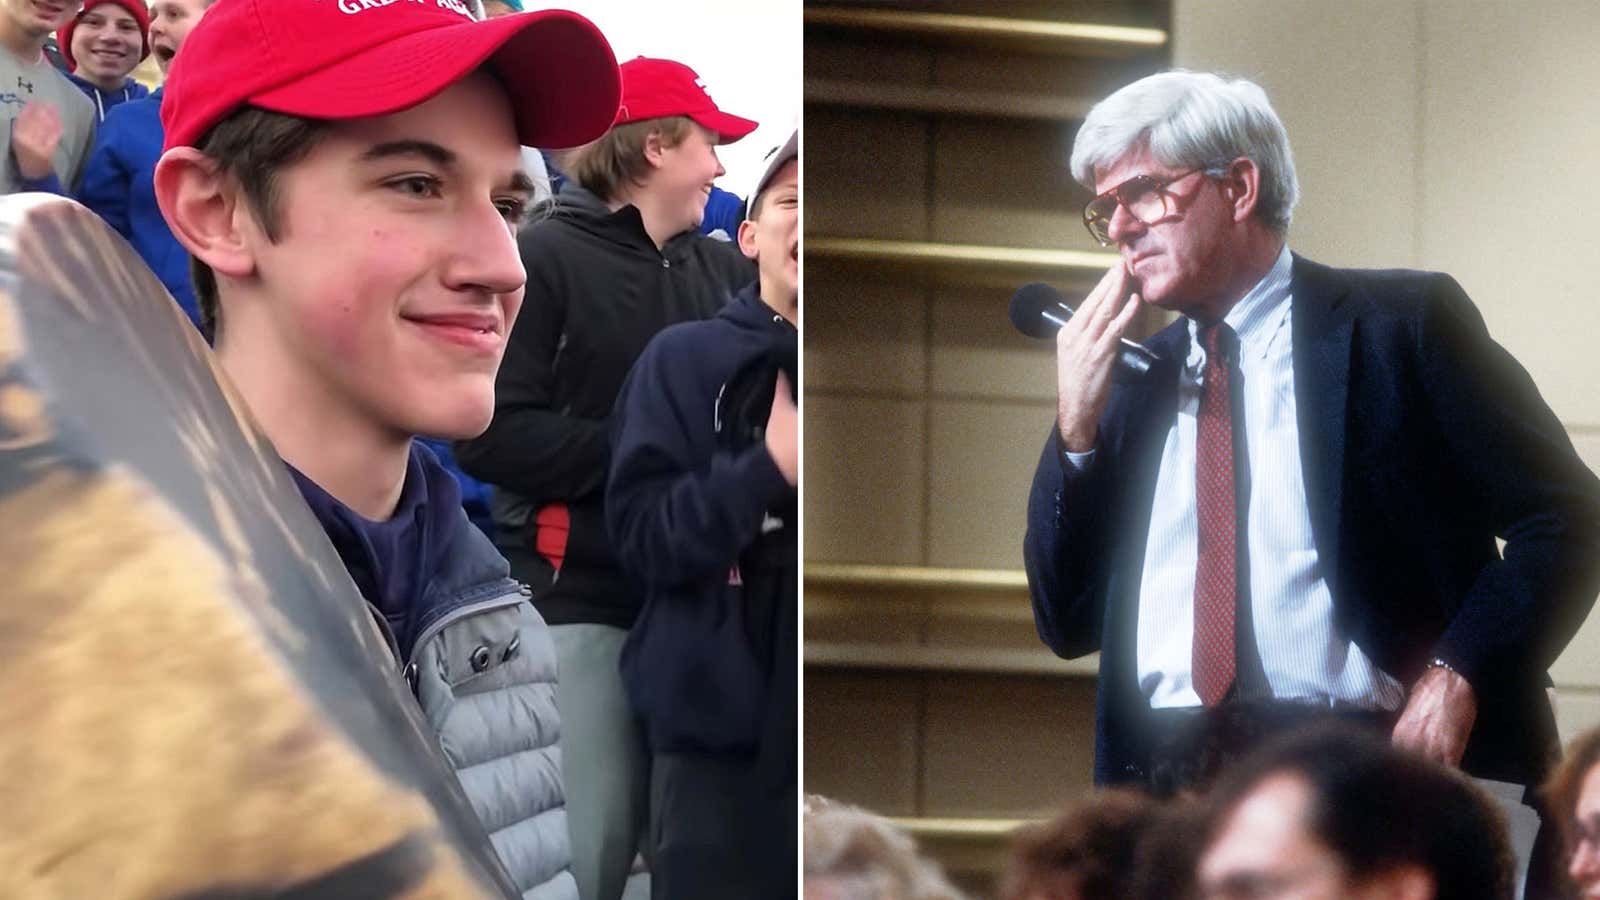 You know who would've done a better interview with the MAGA kid? Phil Donahue<em></em>